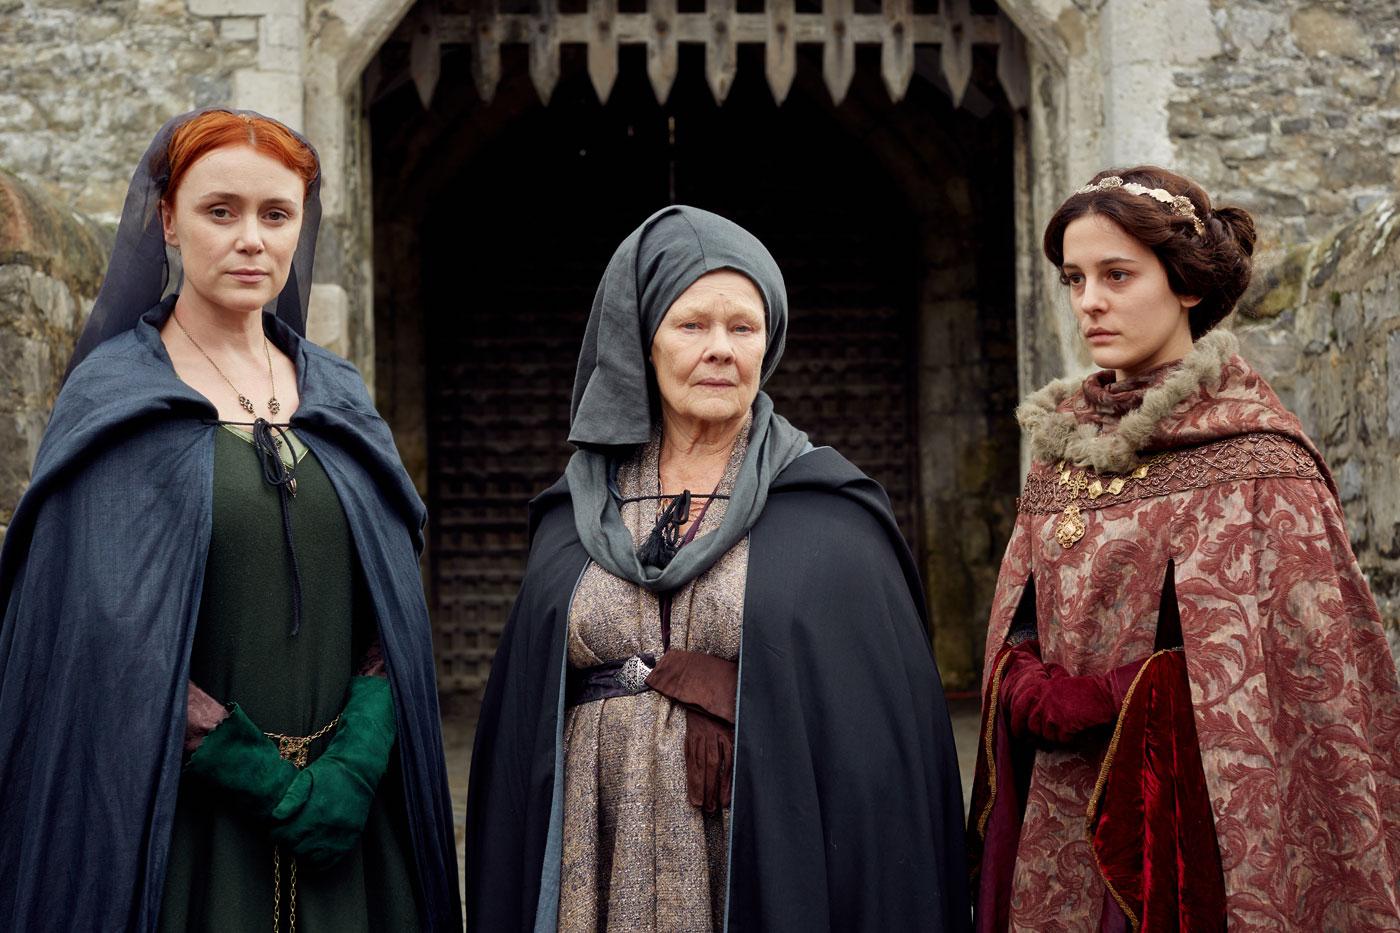 Keeley Hawes, Judi Dench, and Phoebe Fox in 'The Hollow Crown.' Photo: Robert Viglasky © 2015 Carnival Film & Television Ltd